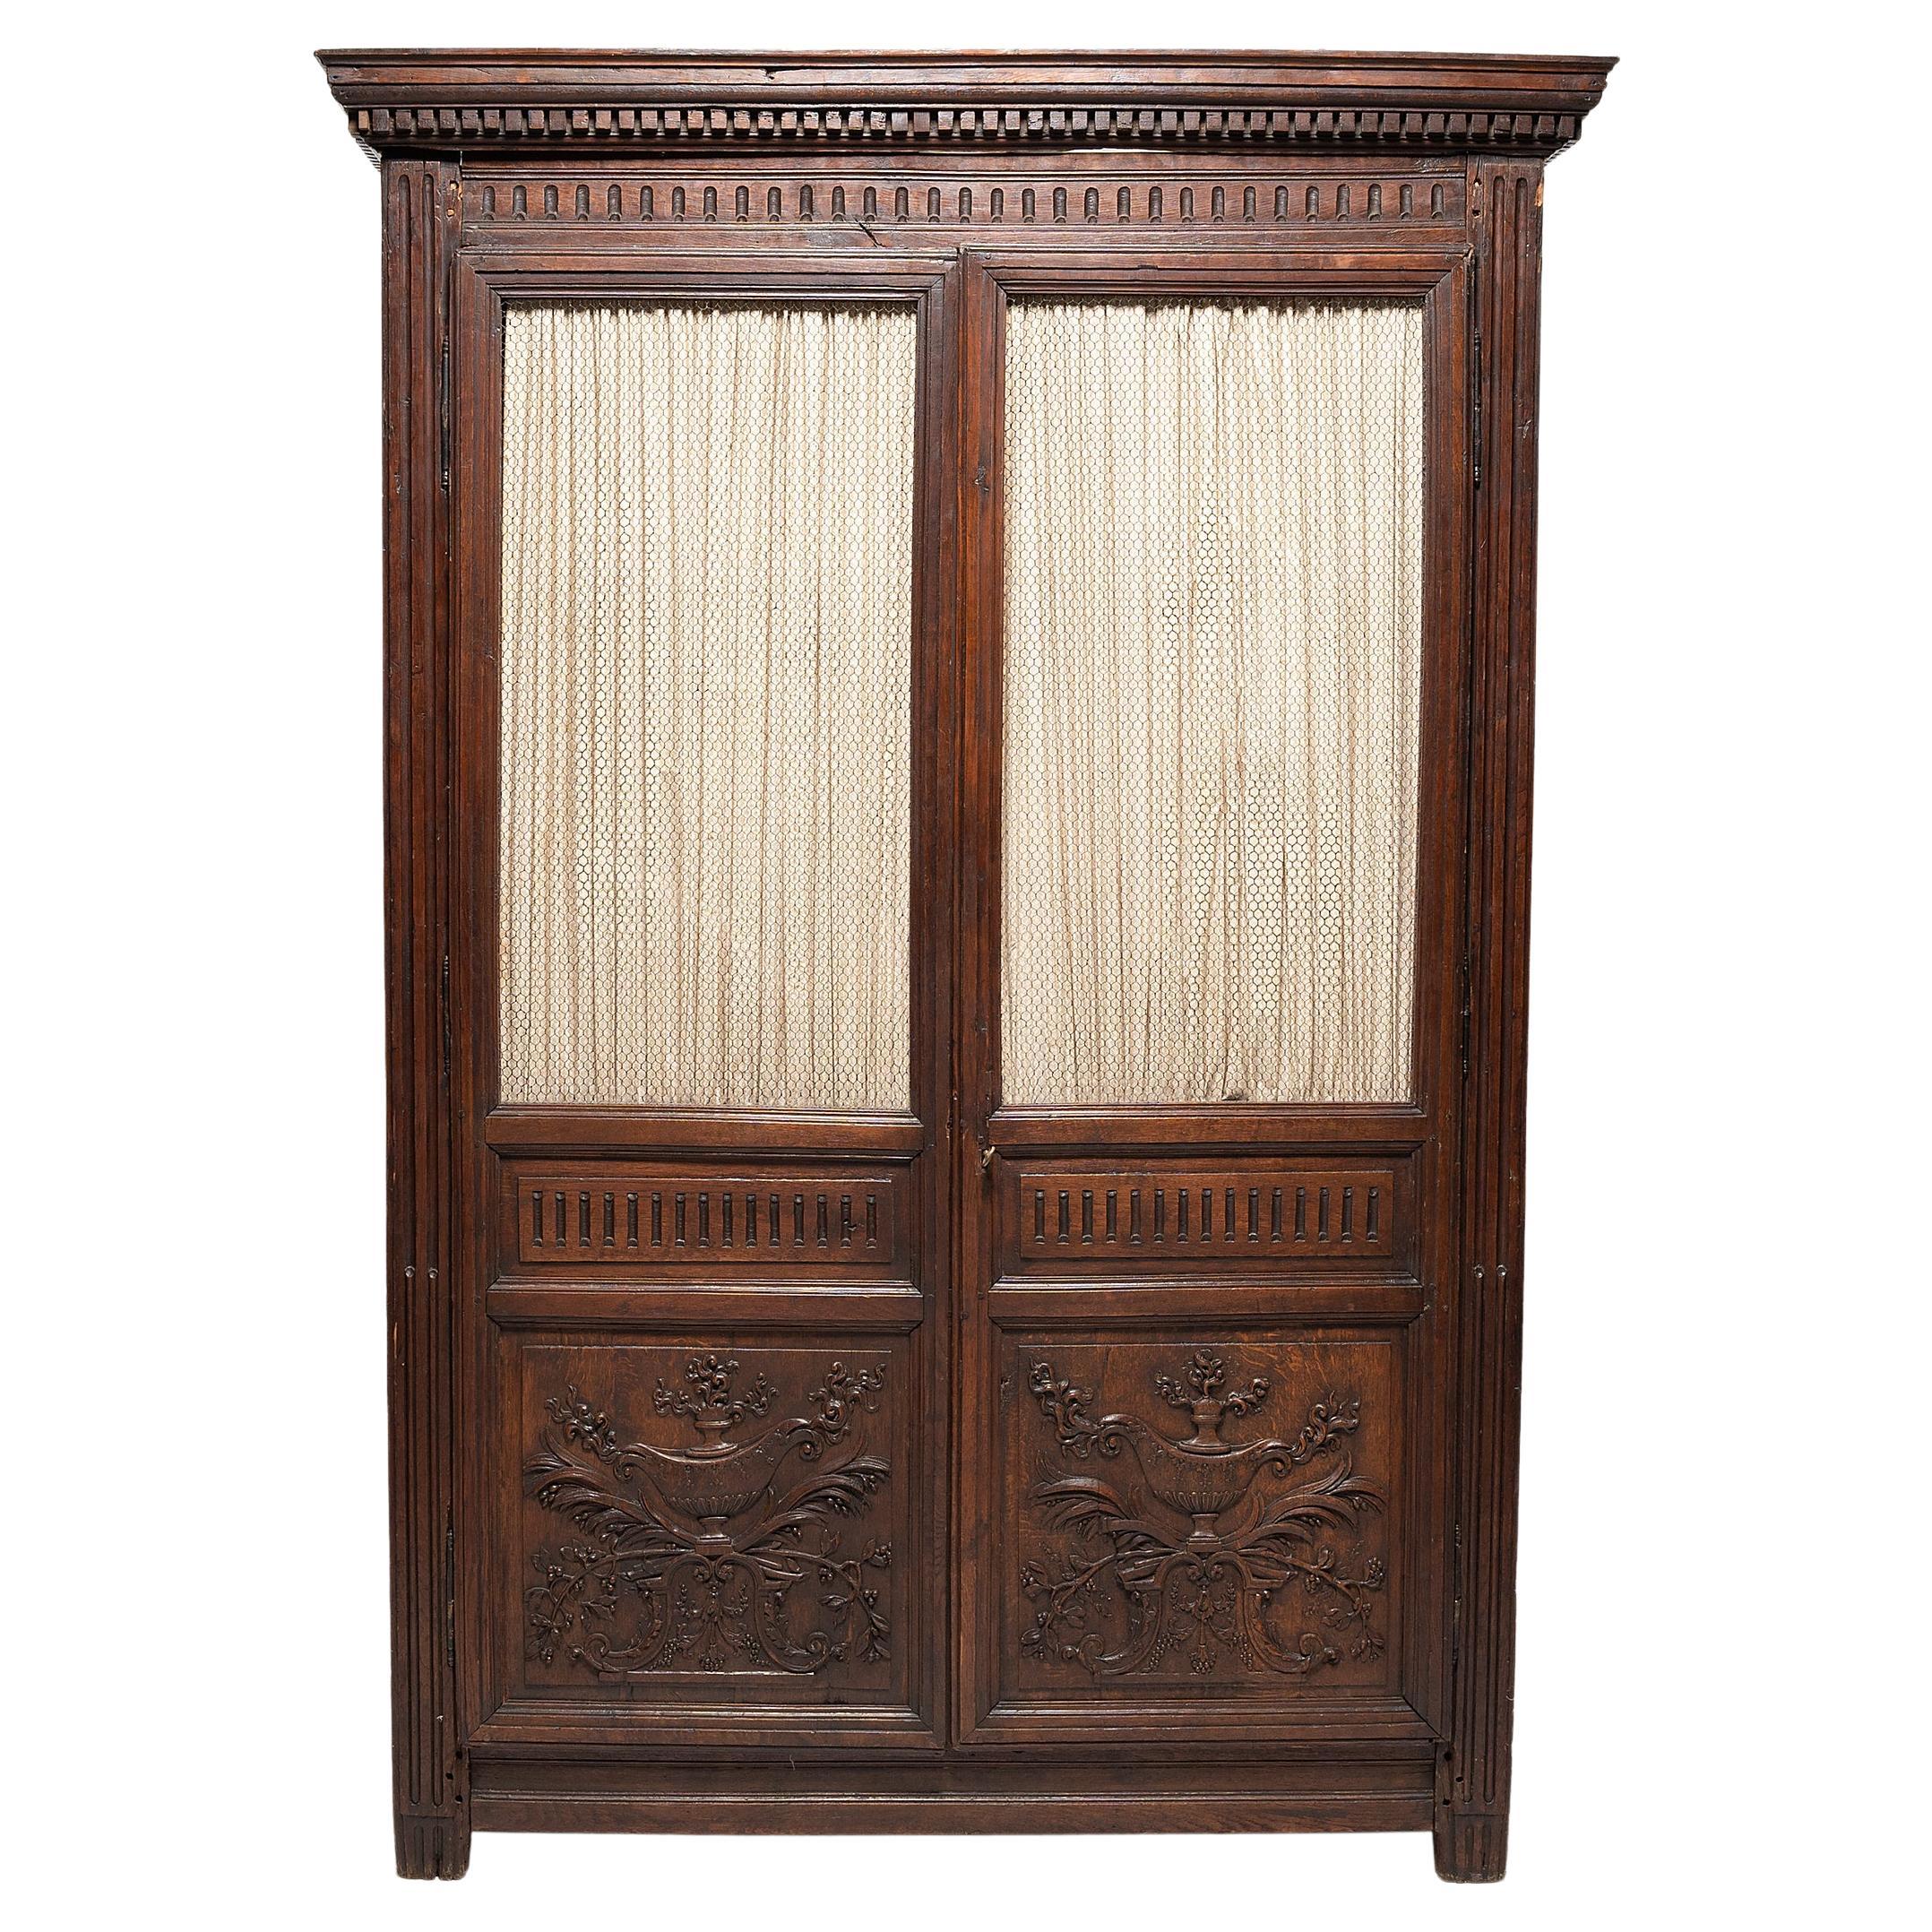 Grand Renaissance Revival Armoire with Wire Screens, circa 1800